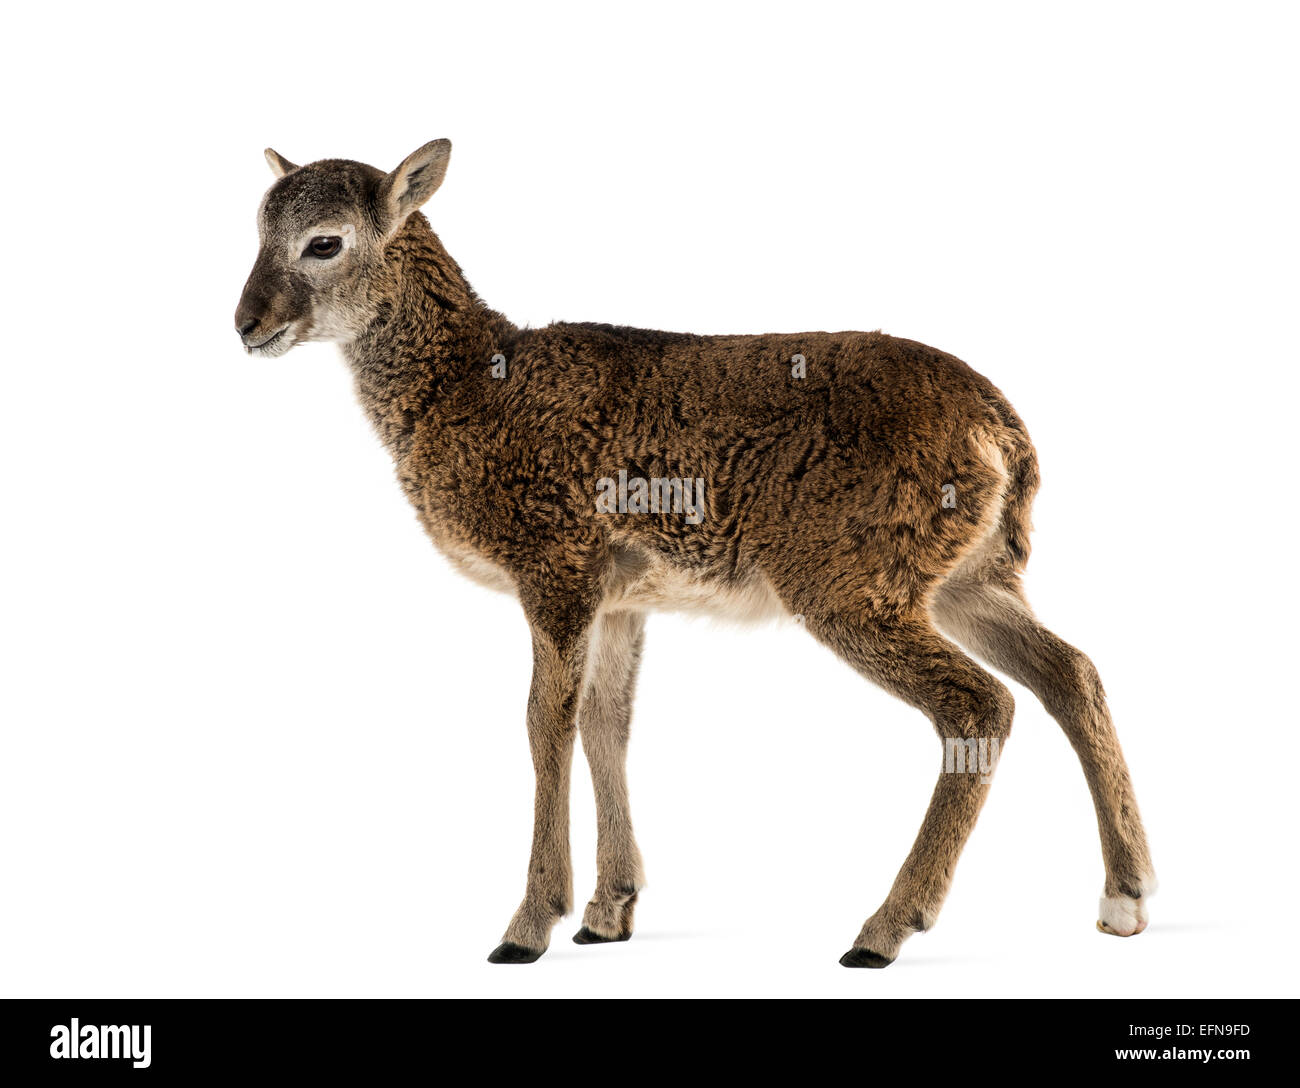 Young mouflon, Ovis orientalis orientalis, standing in front of white background Stock Photo